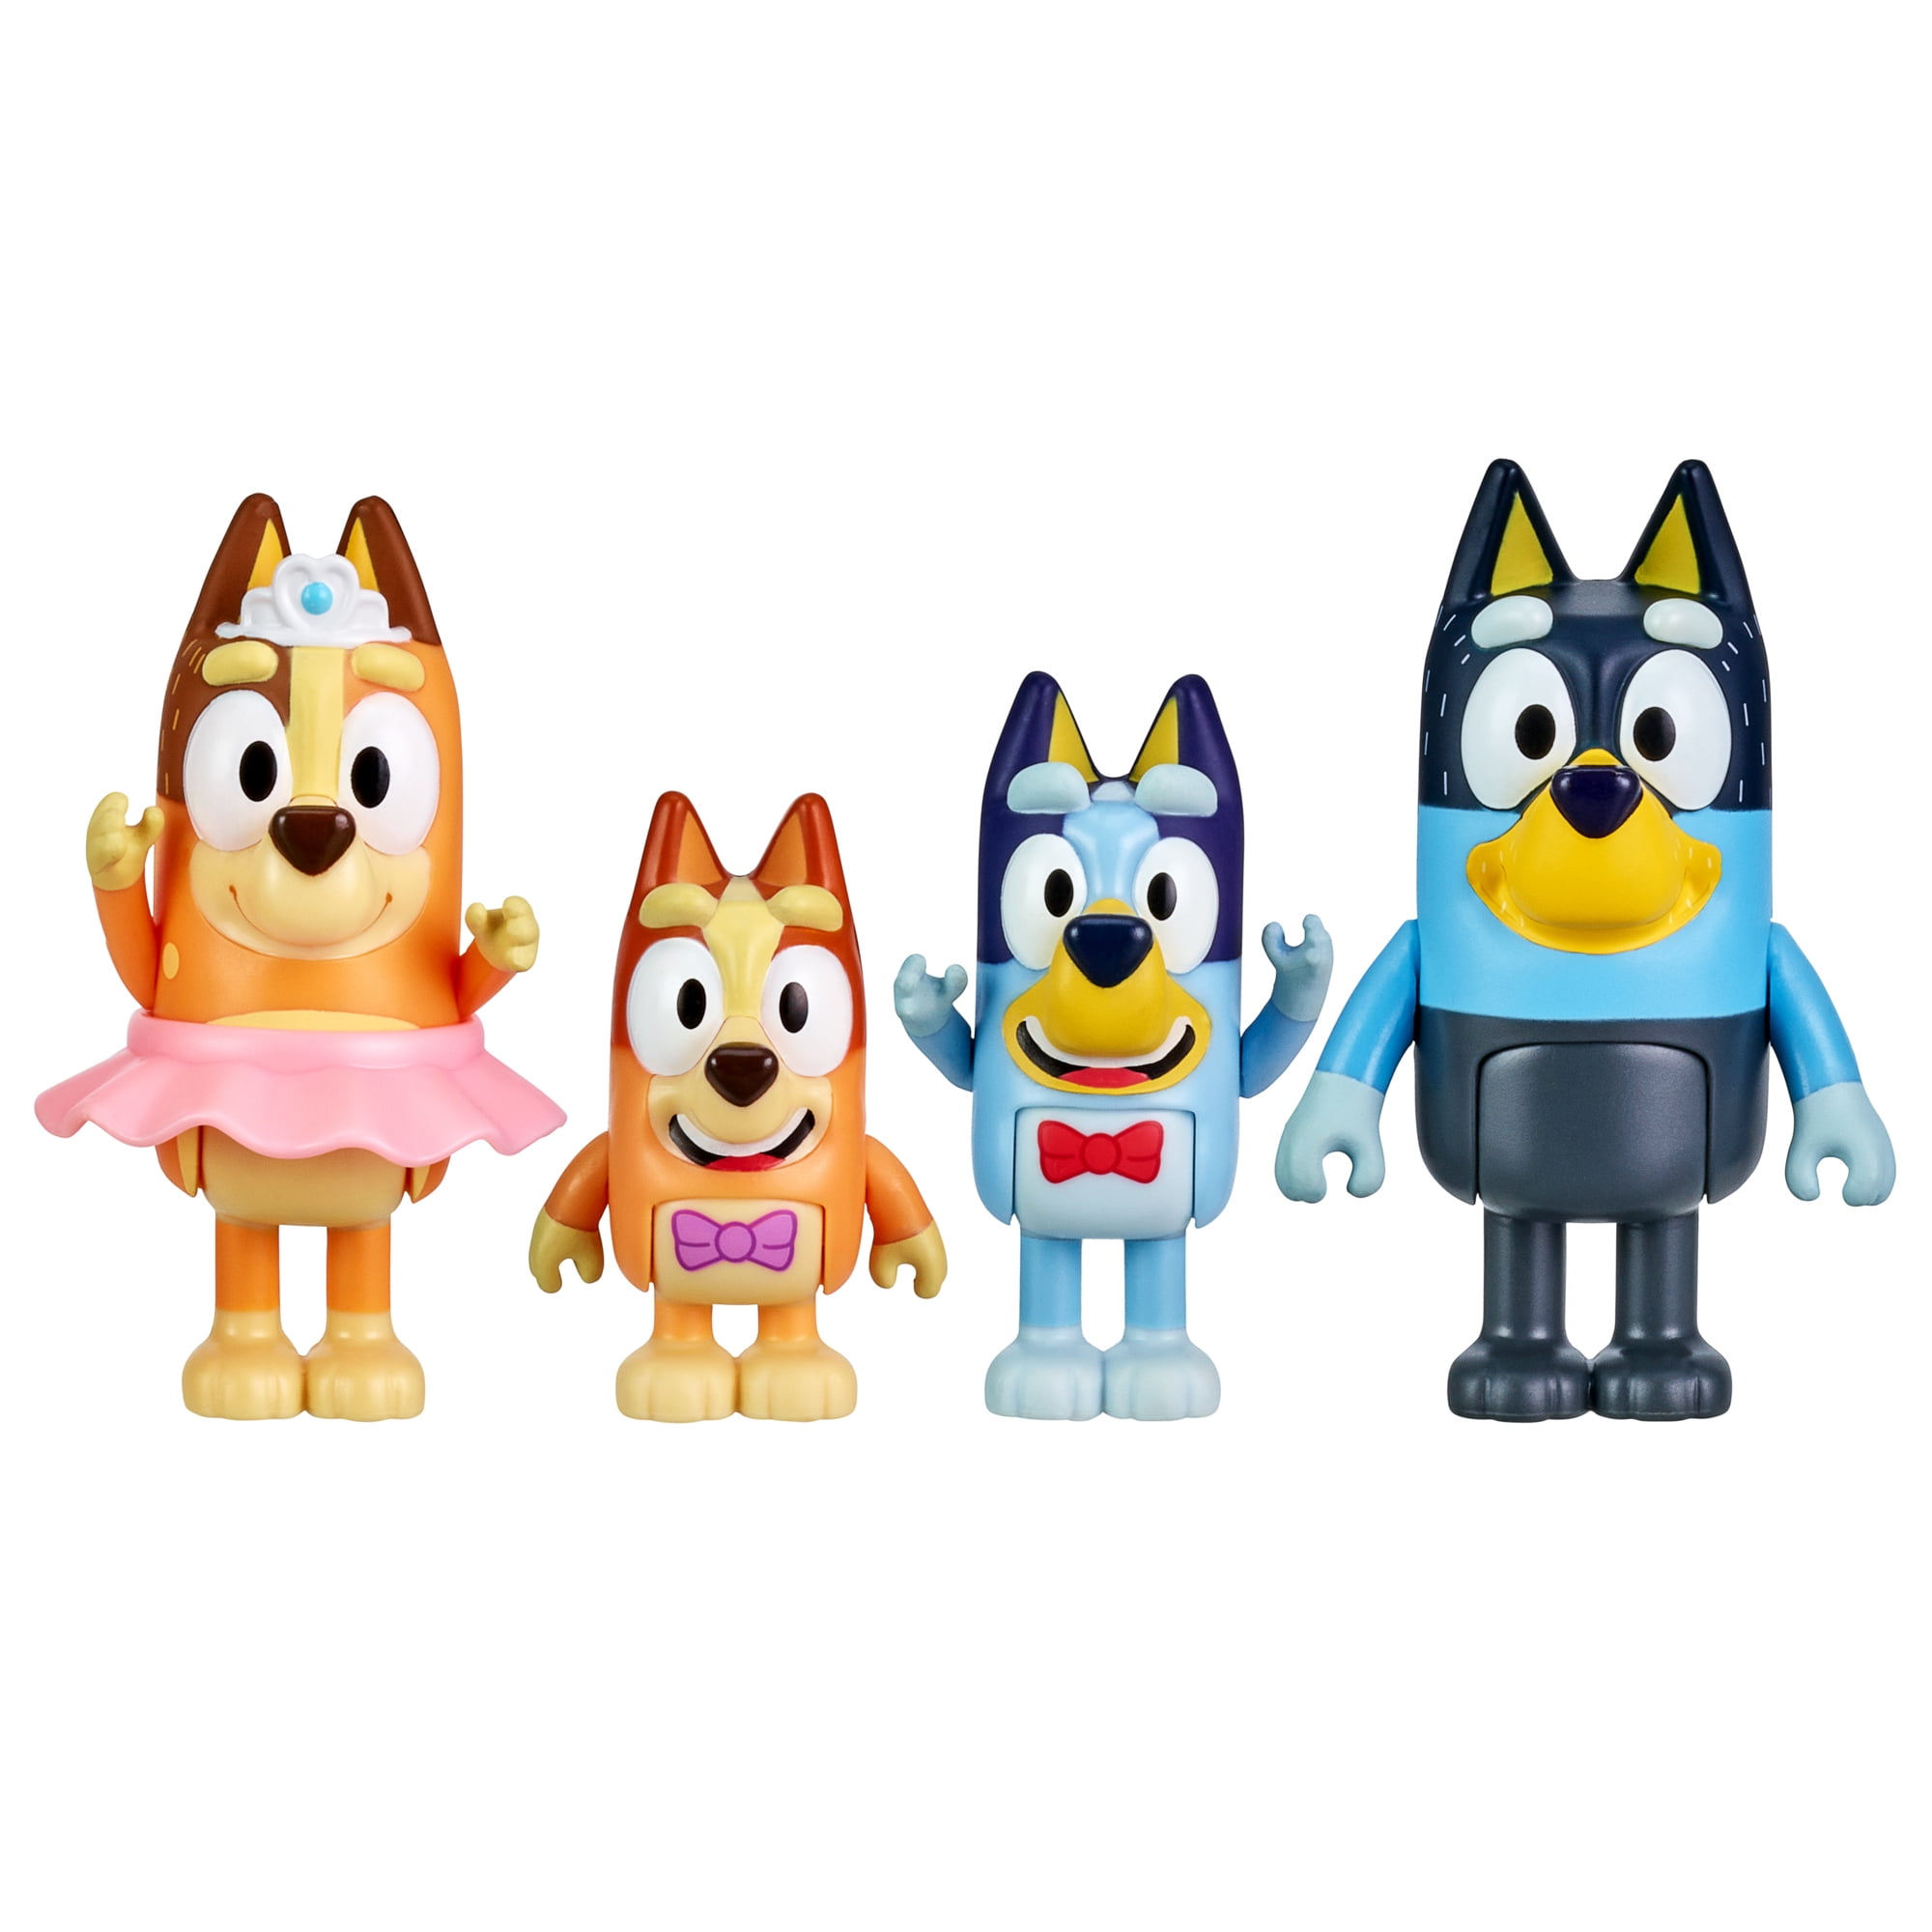 Bluey "The Show" 4-Pack, 2.5-3 inch Figures,  Bluey's family - Bluey, Bingo, Chilli (Mum) and Bandit (Dad), Preschool, Toys for Kids, Ages 3+